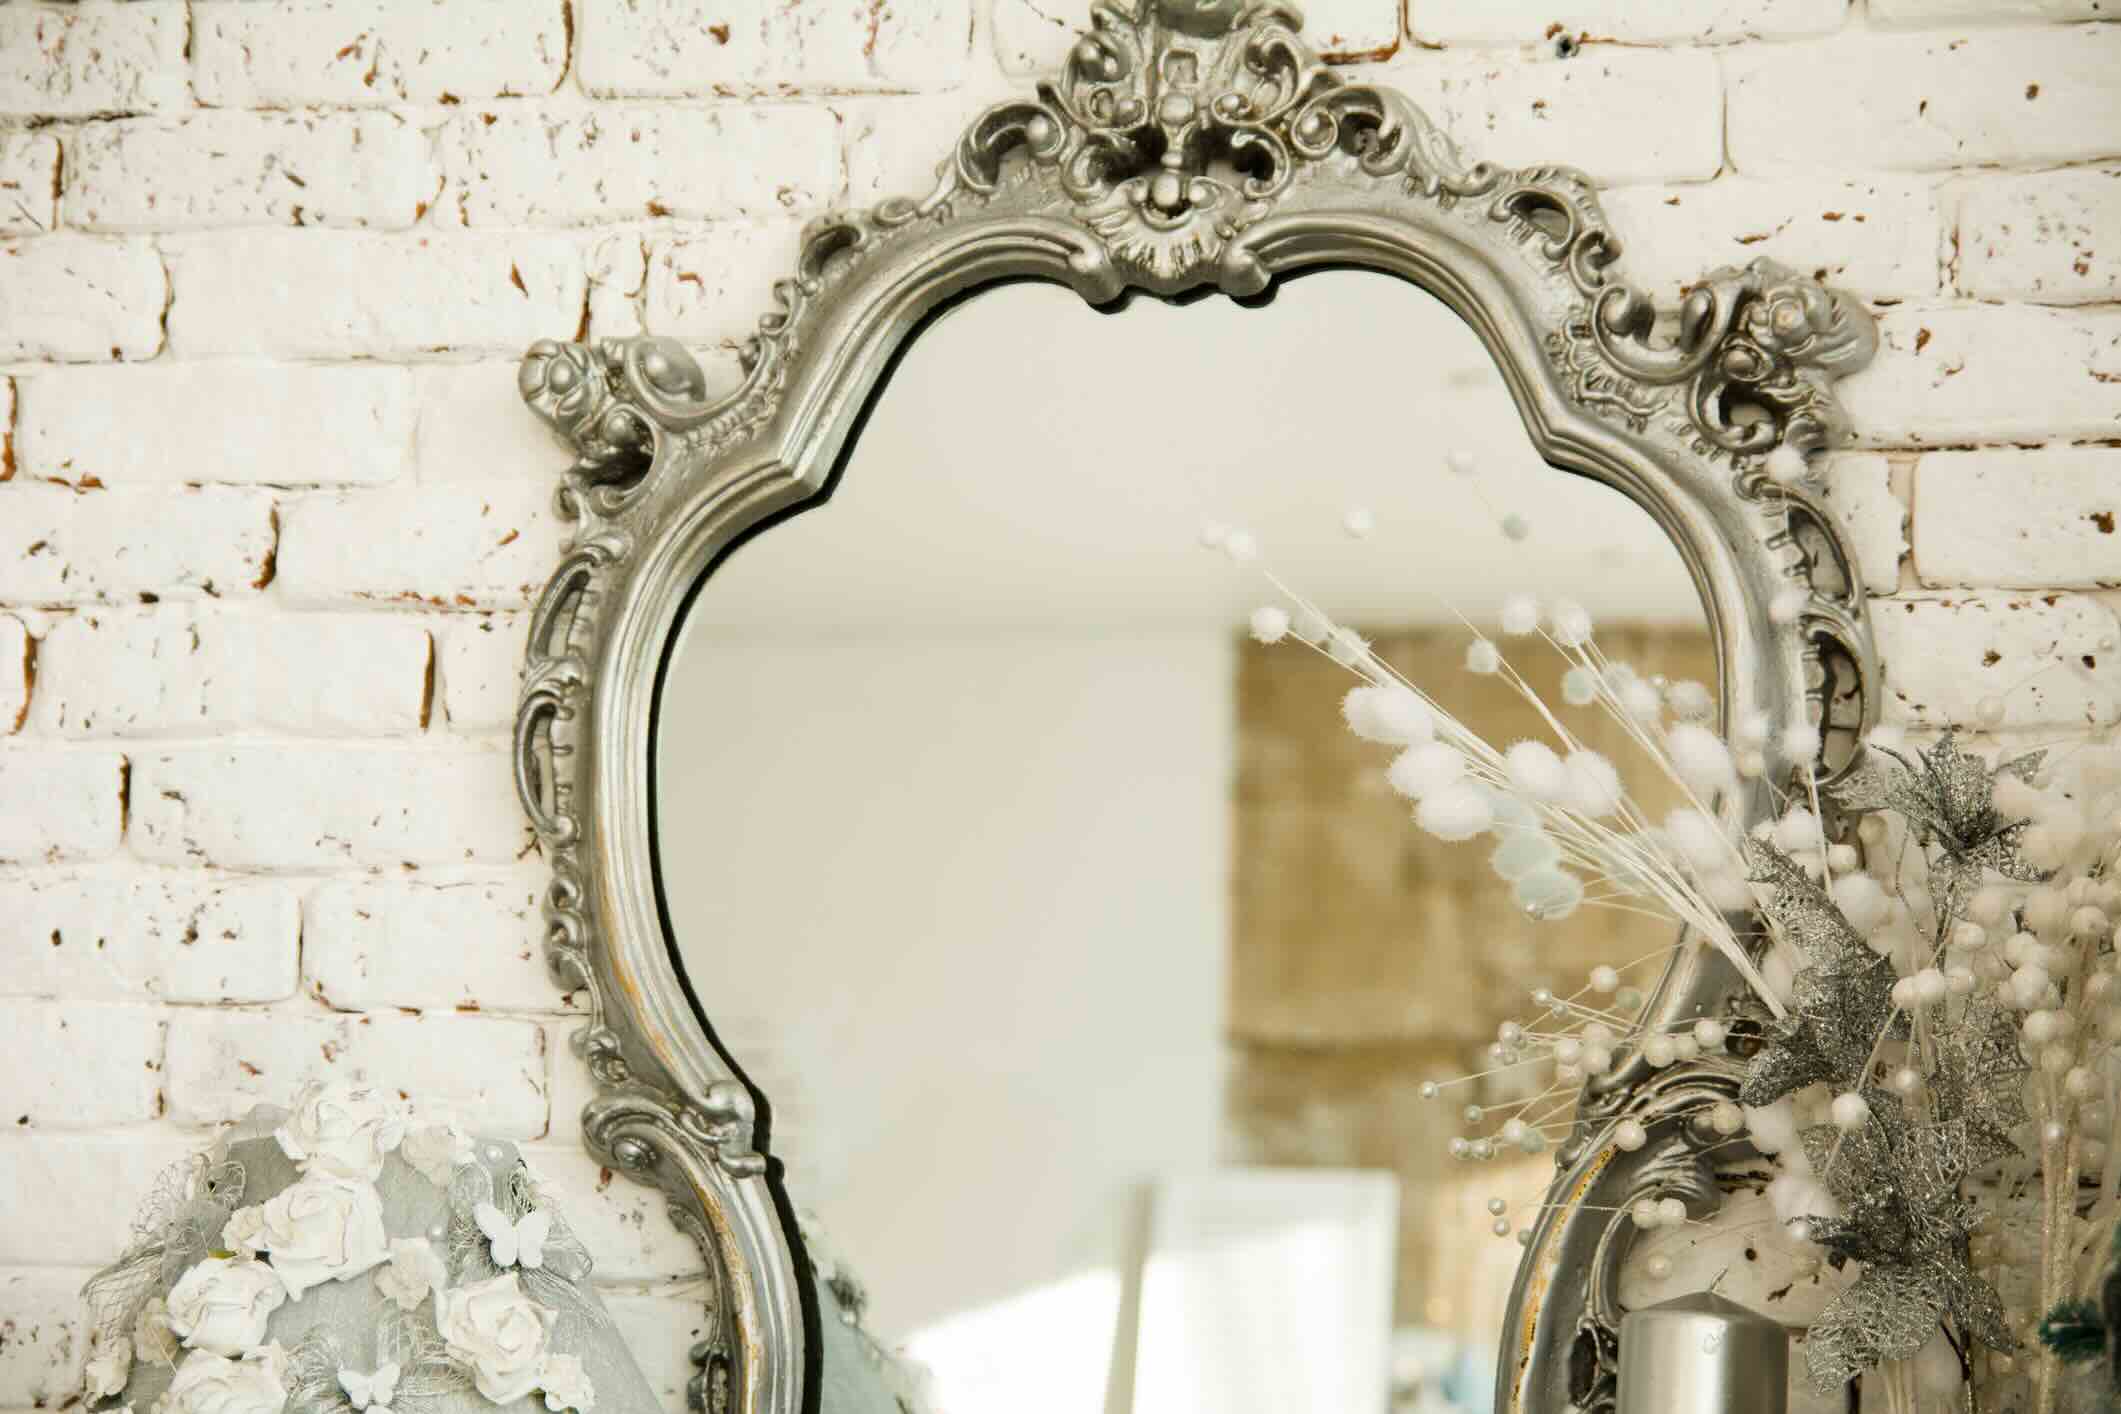 How To Restore Old Mirrors